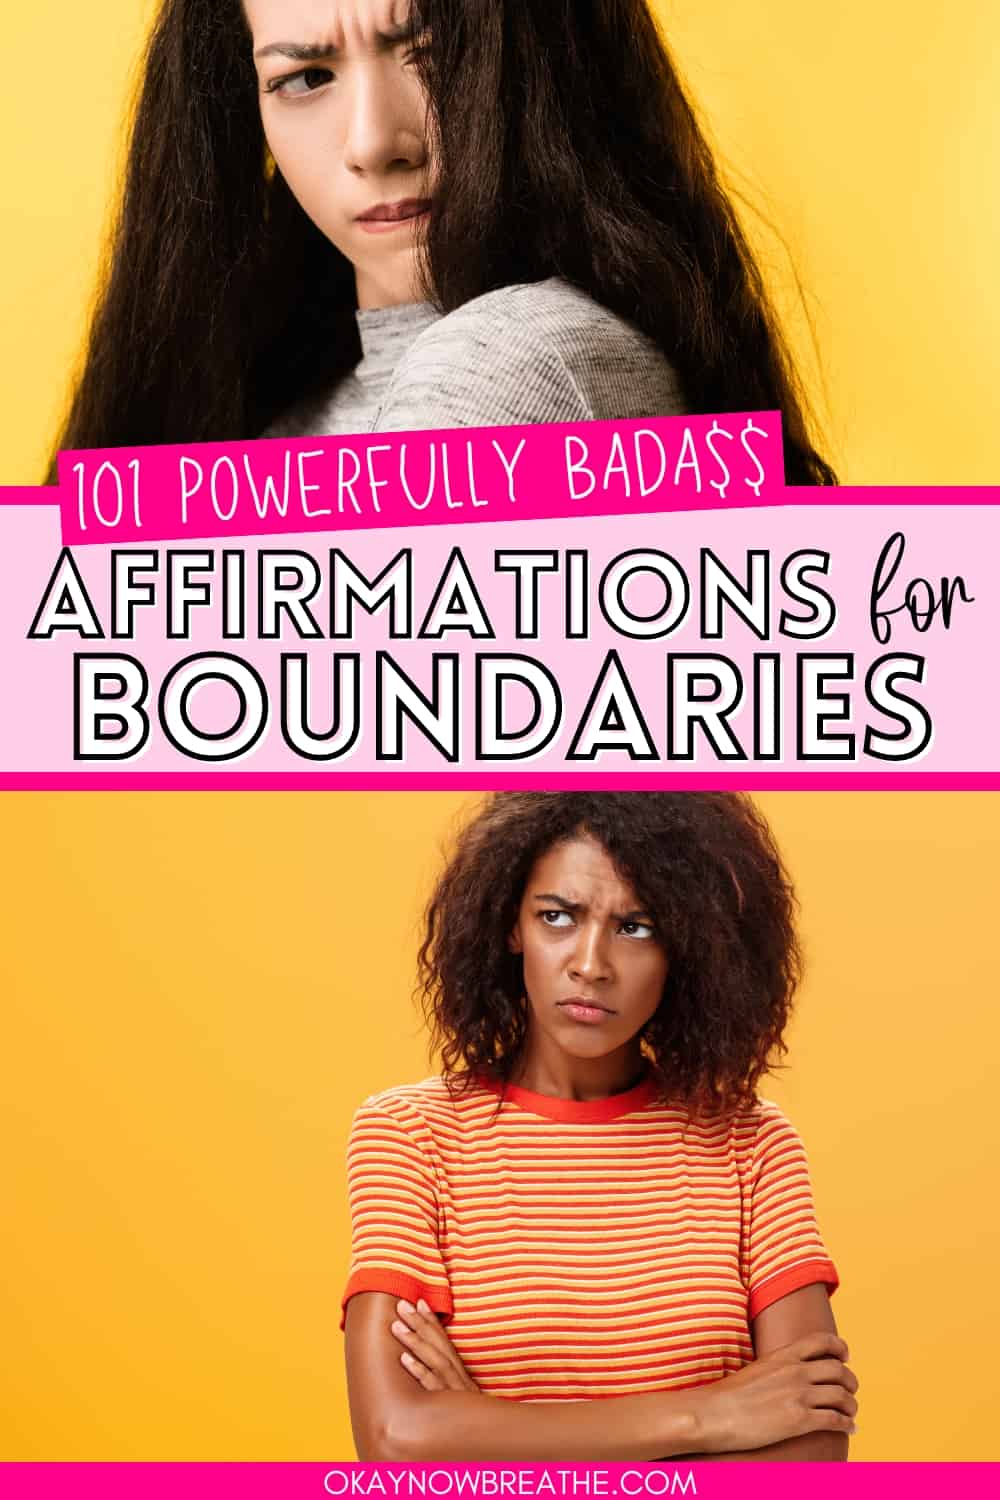 There is a woman with a scowl on her face. In the center of image, there is text that says 101 powerfully bada$$ affirmations for boundaries. Underneath that, there is another woman looking up with a scowl and her arms crossed.